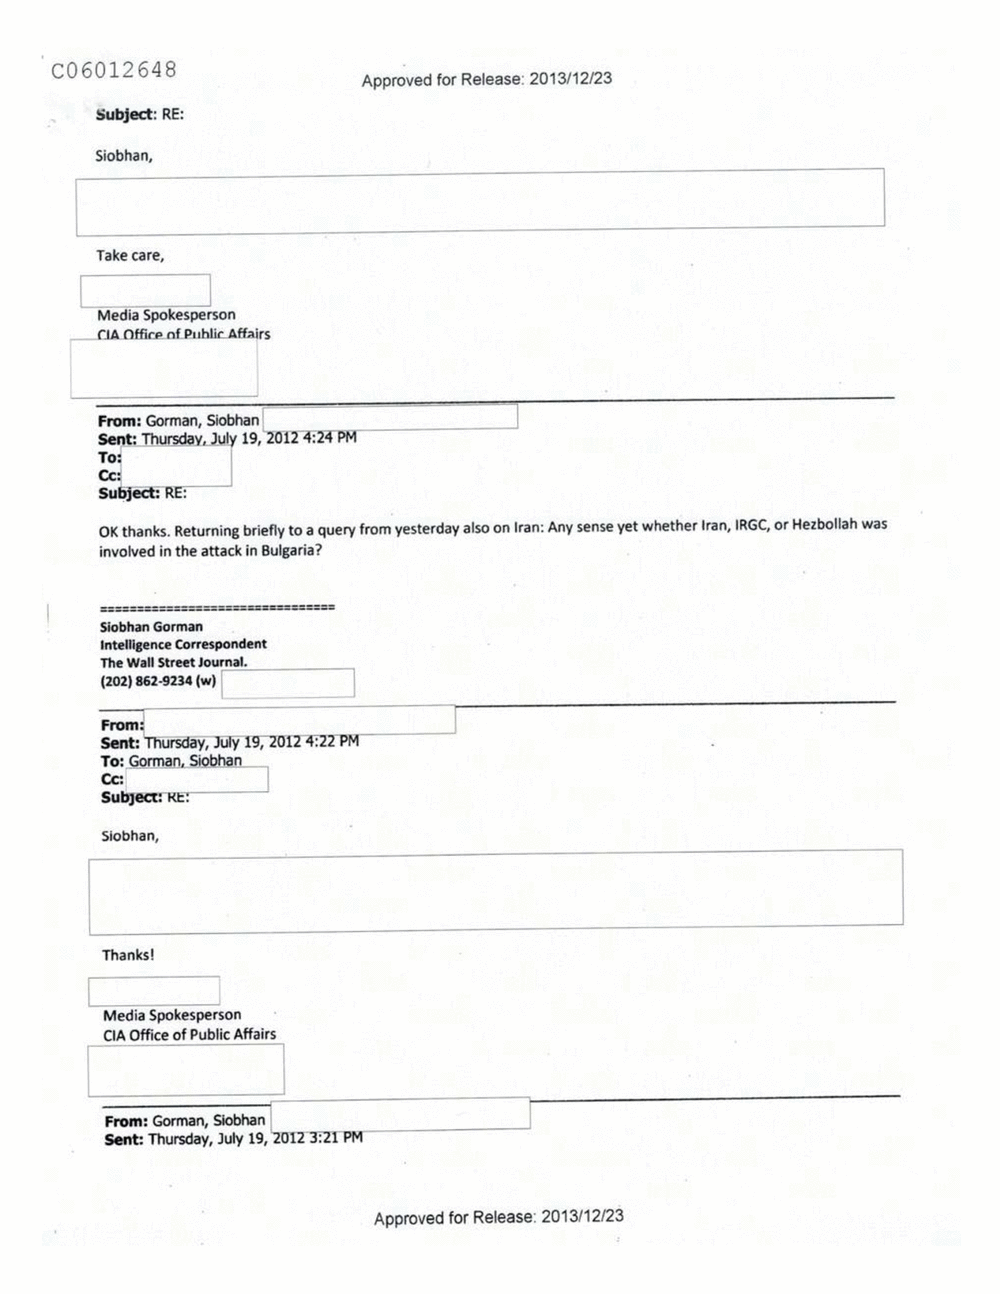 Page 219 from Email Correspondence Between Reporters and CIA Flacks